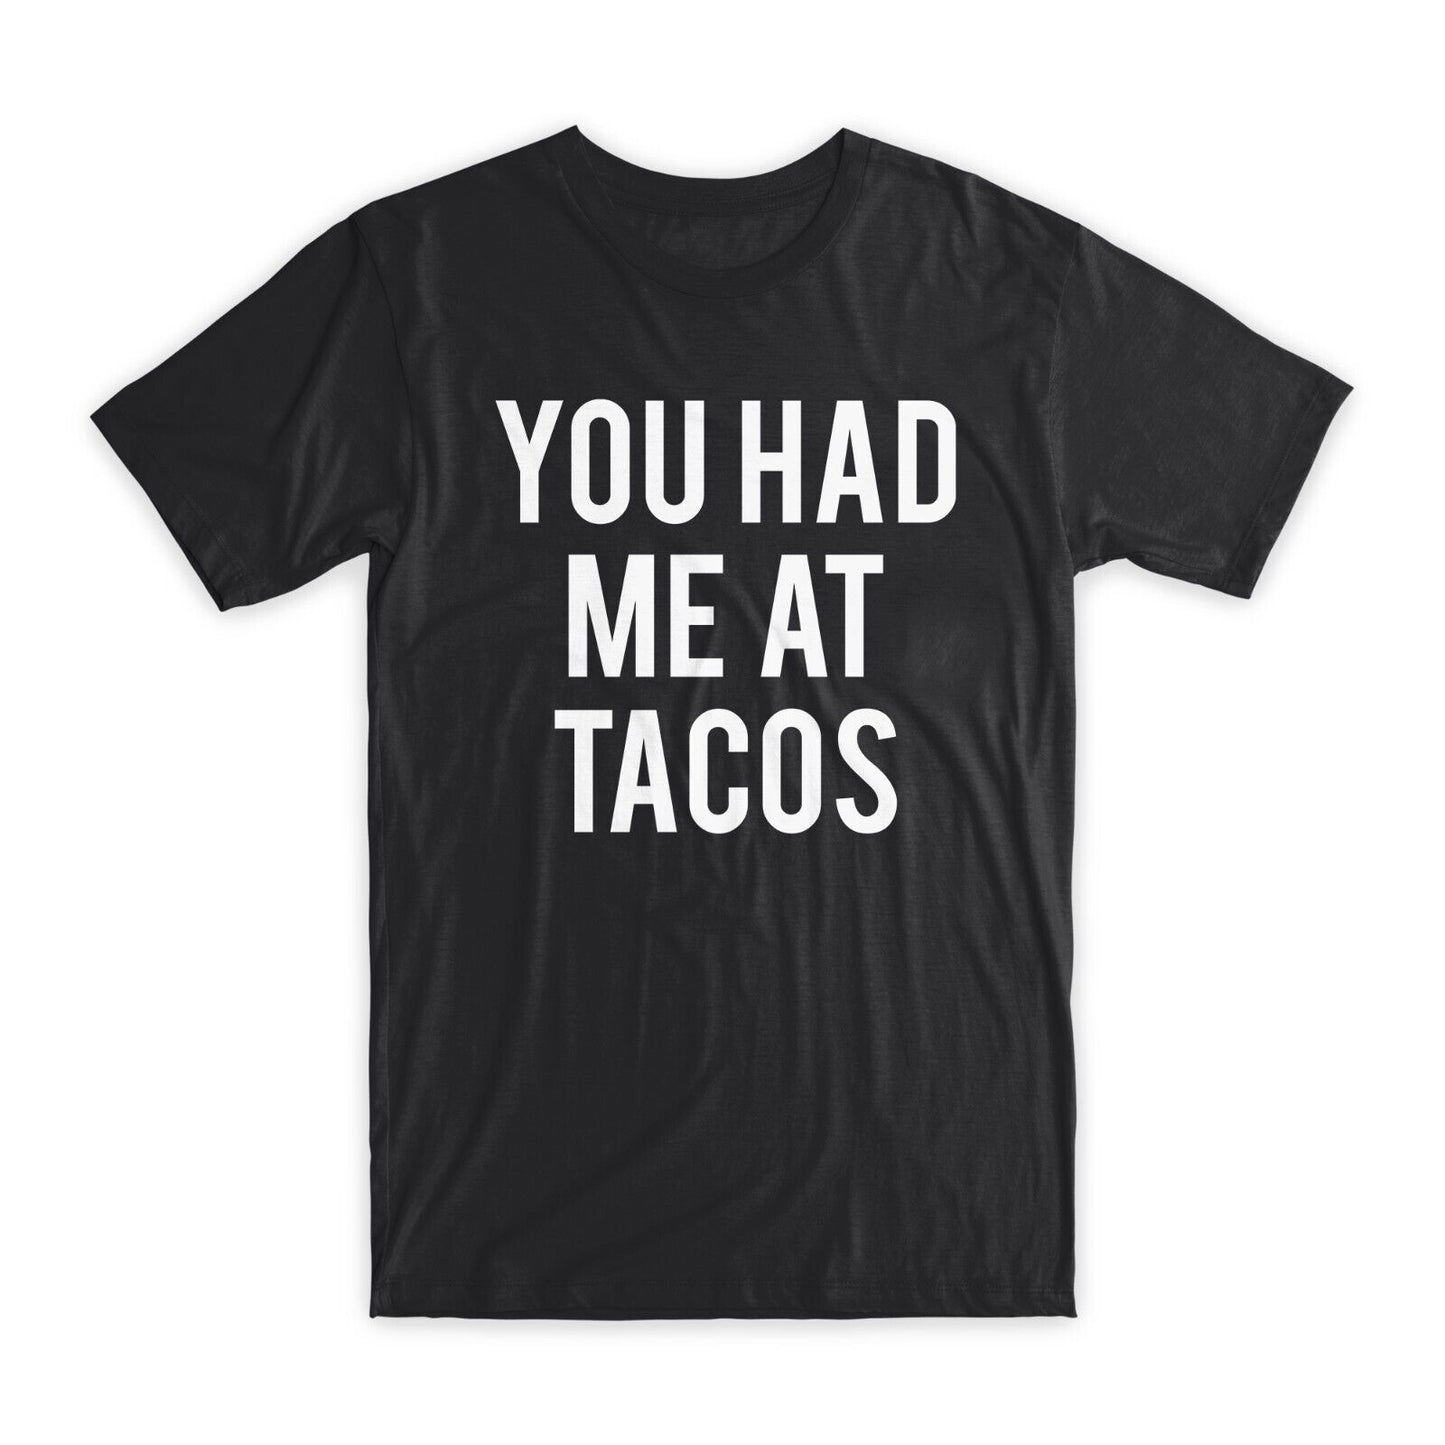 You Had Me at Tacos T-Shirt Premium Soft Cotton Crew Neck Funny Tees Gifts NEW